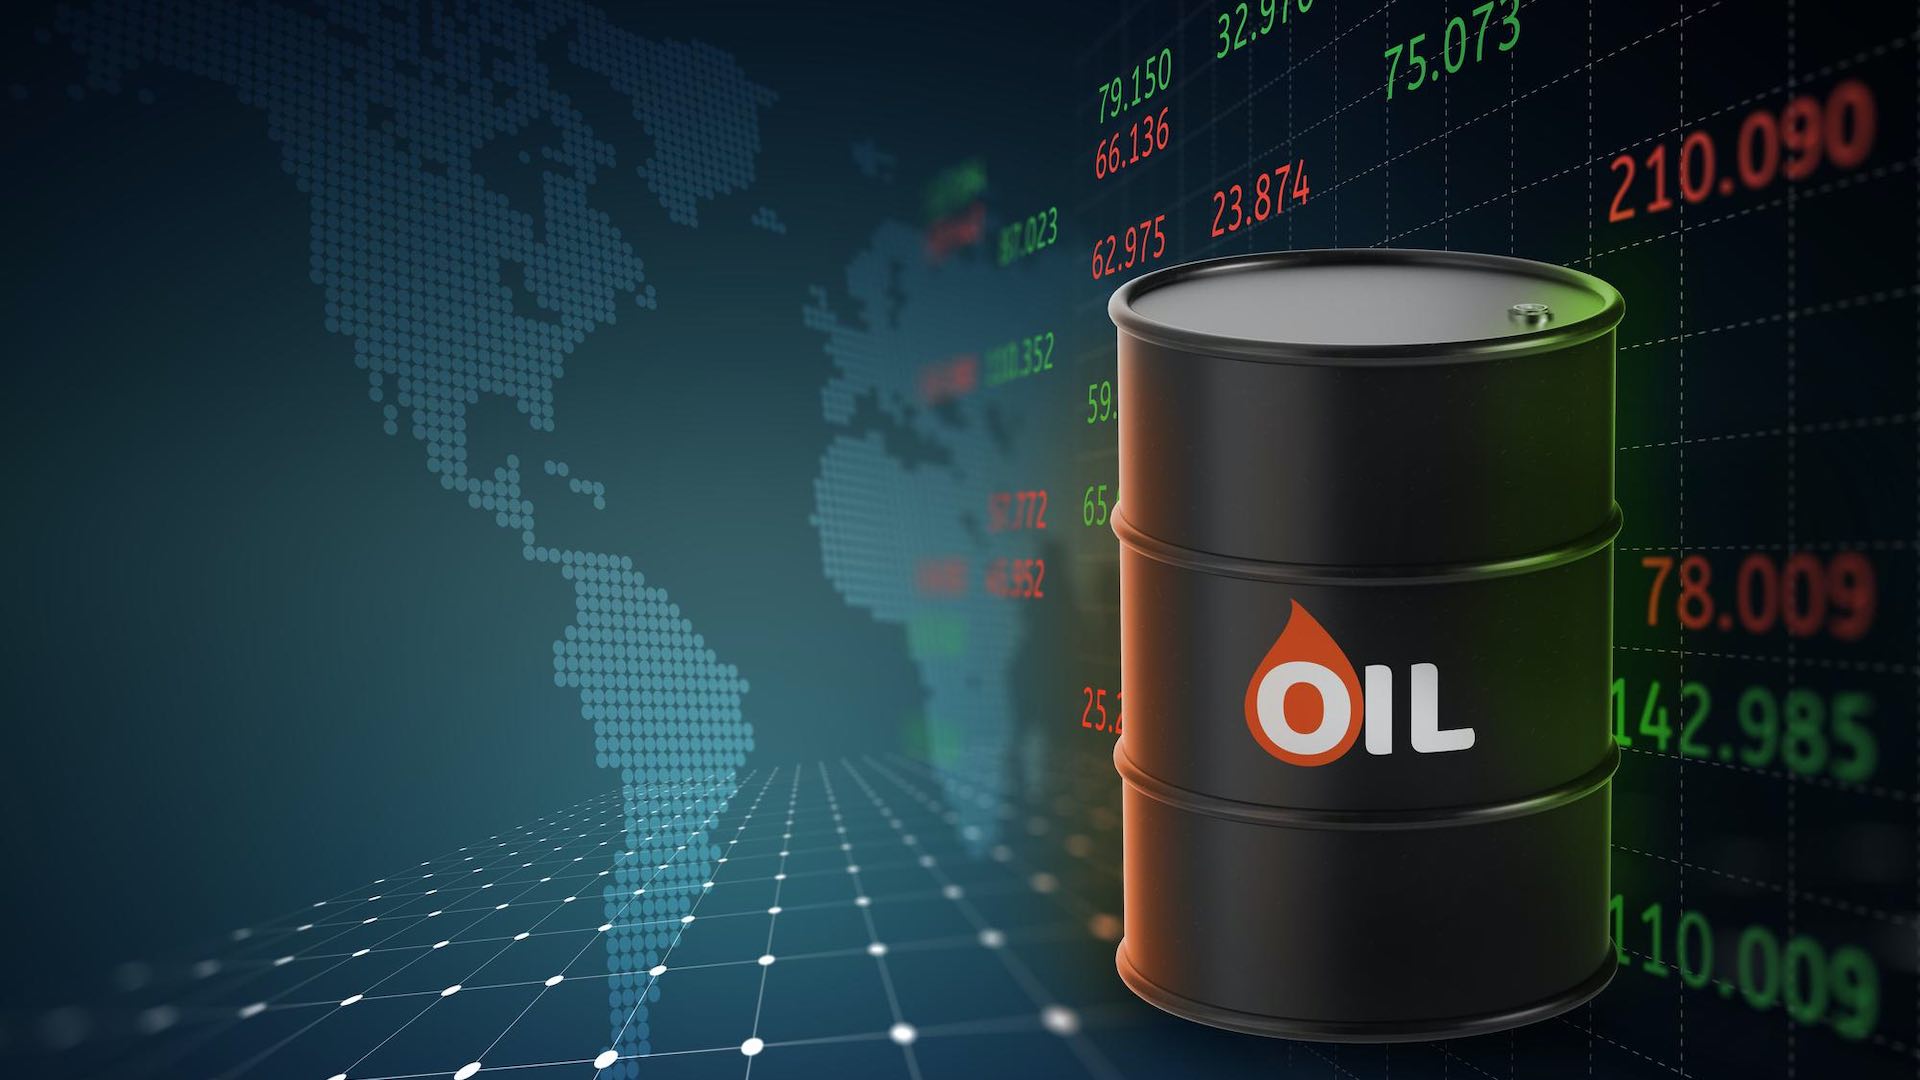 Oil gains ground as OPEC report highlights steady demand